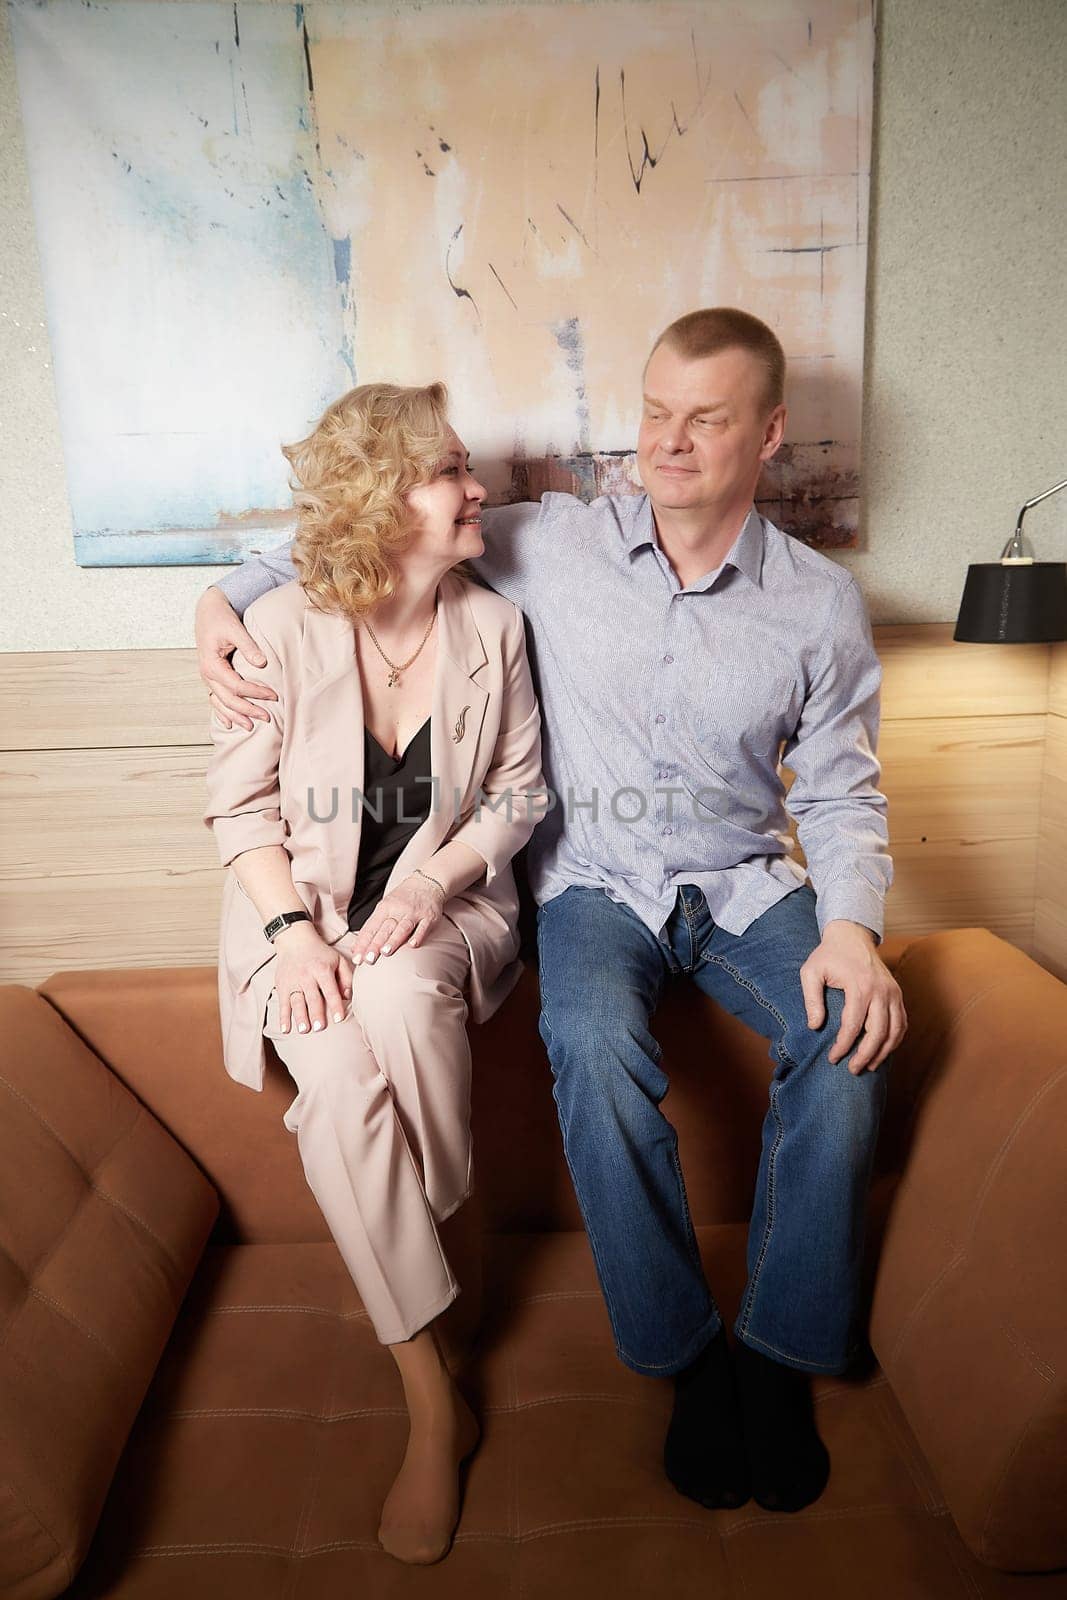 Loving adult couple communicates and embraces privately in the living room or in hotel. The woman is wearing business formal suit and man is wearing jeans and a shirt, indicating a close relationship by keleny